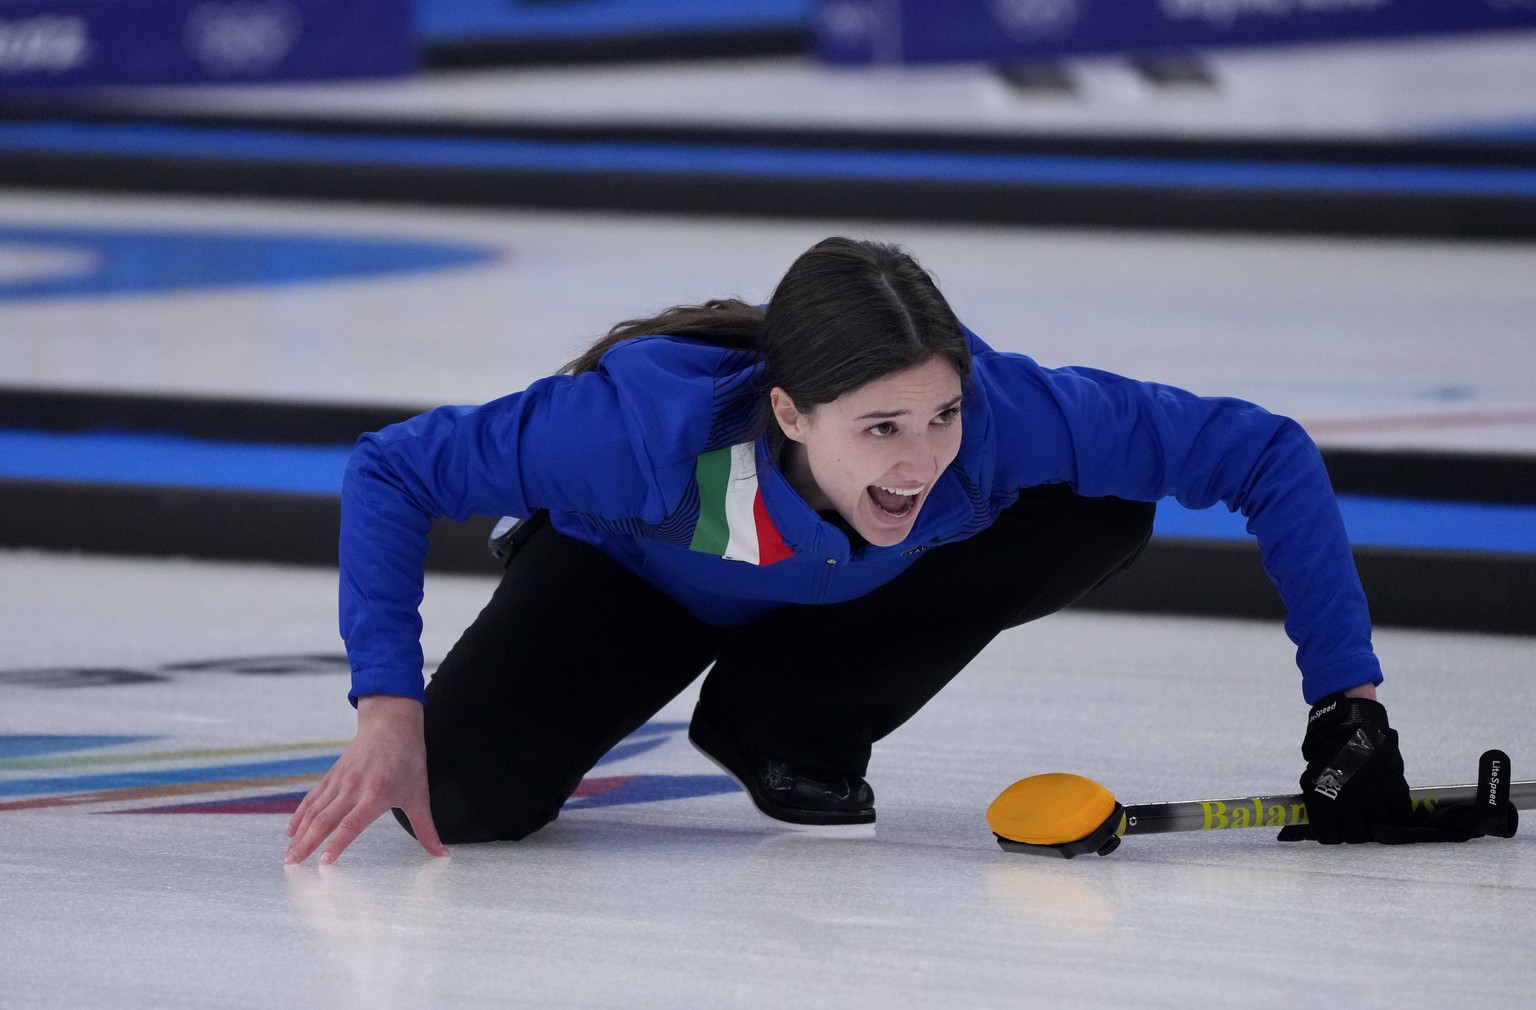 Italy&#039;s Stefania Constantini, directs her team mate, during the mixed doubles curling match against Sweden, at the 2022 Winter Olympics, Sunday, Feb. 6, 2022, in Beijing. (AP Photo/Nariman El-Mof ...